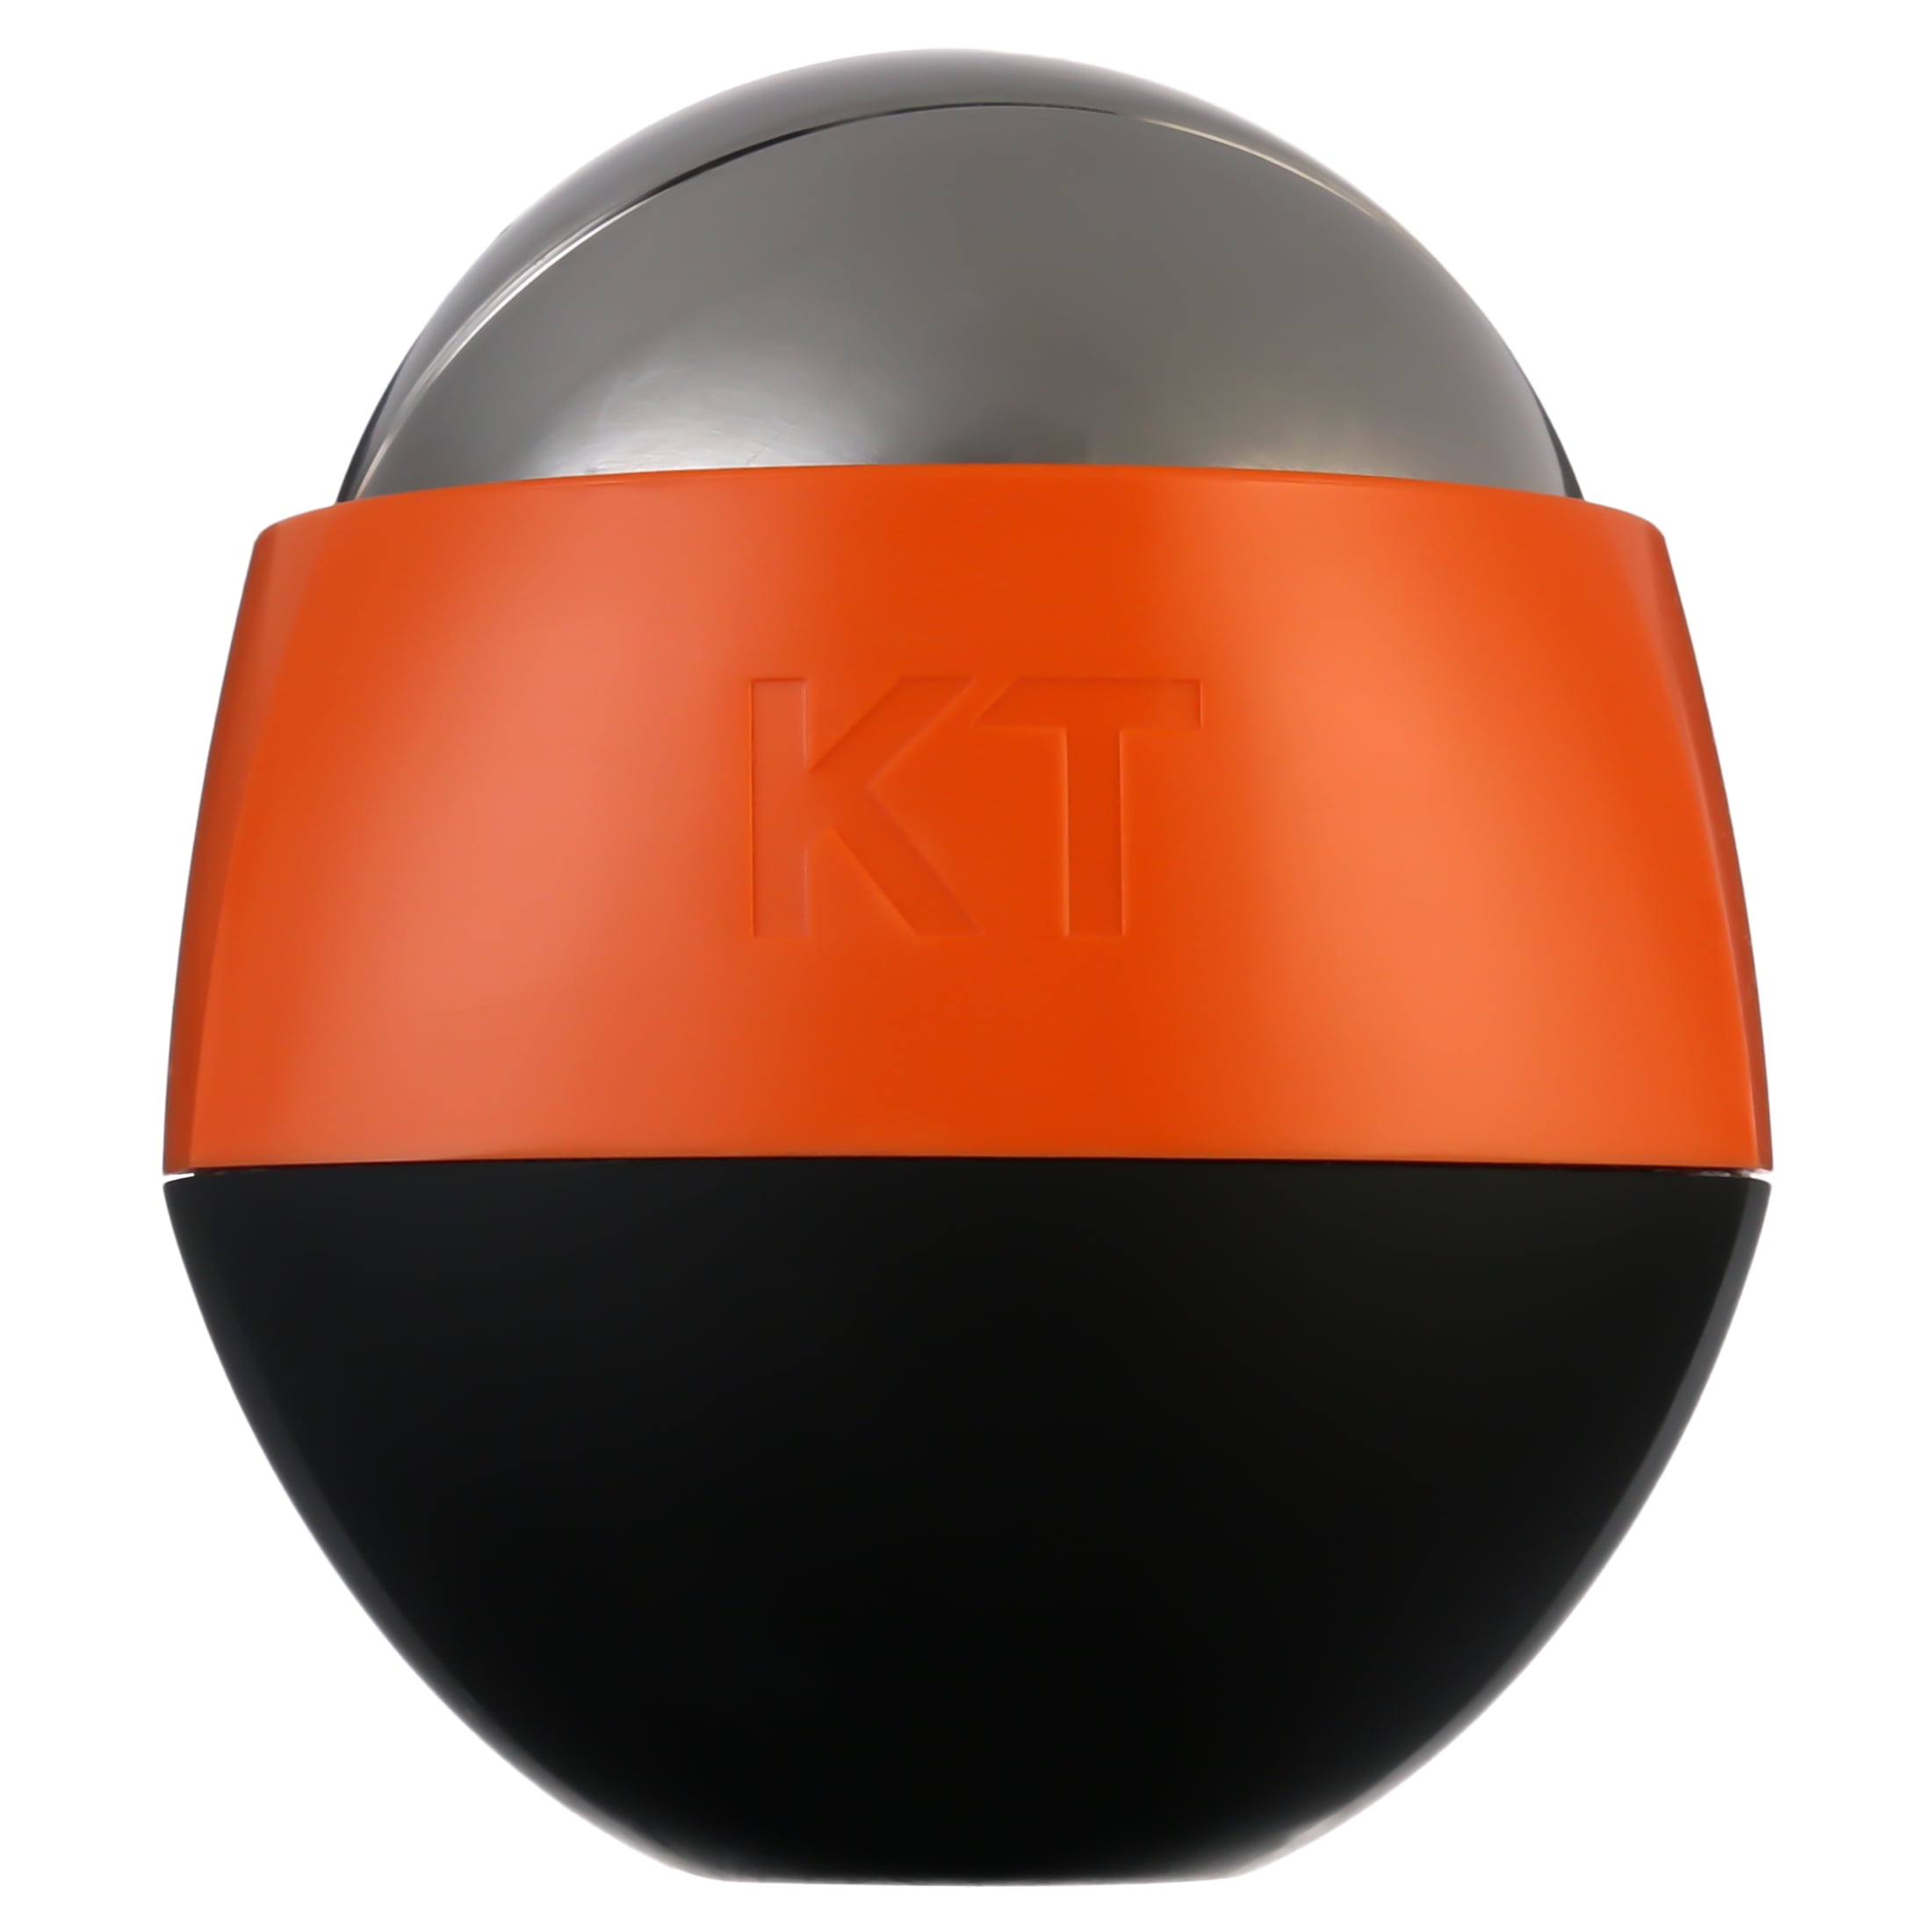 KT Recovery+® Cold Massage Roller - Massage Ball for Pain – KT Tape